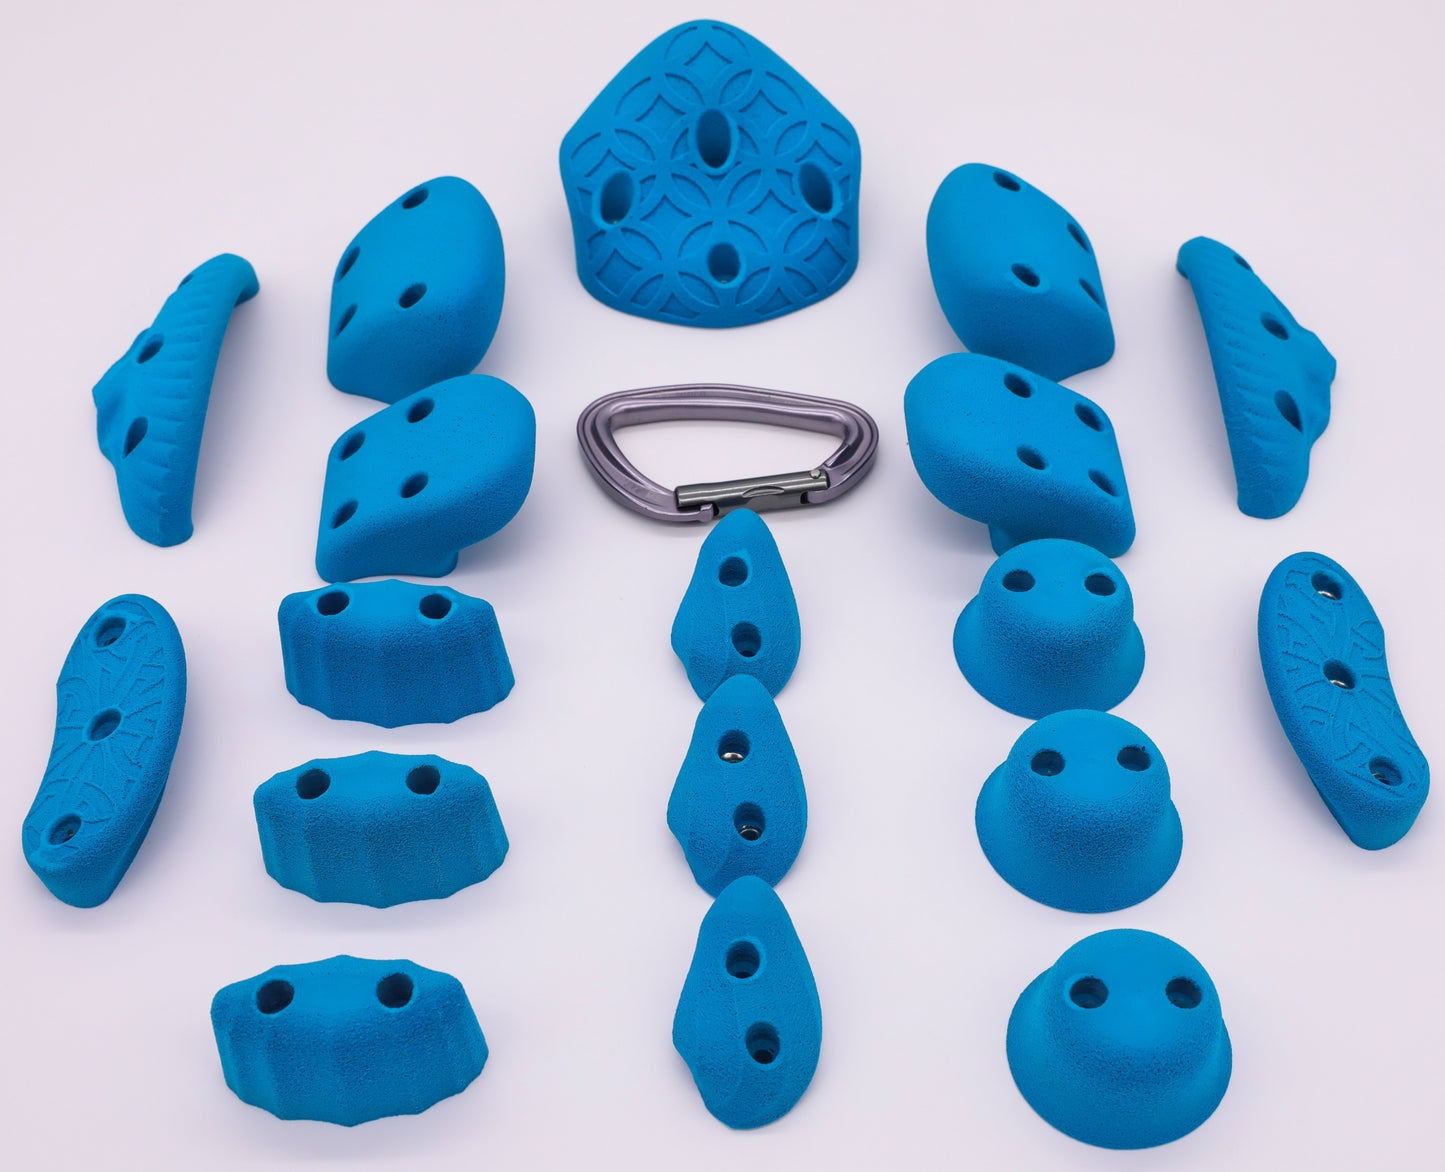 Beginners and Kids Deluxe Climbing Hold Set, Screw On Climbing Holds